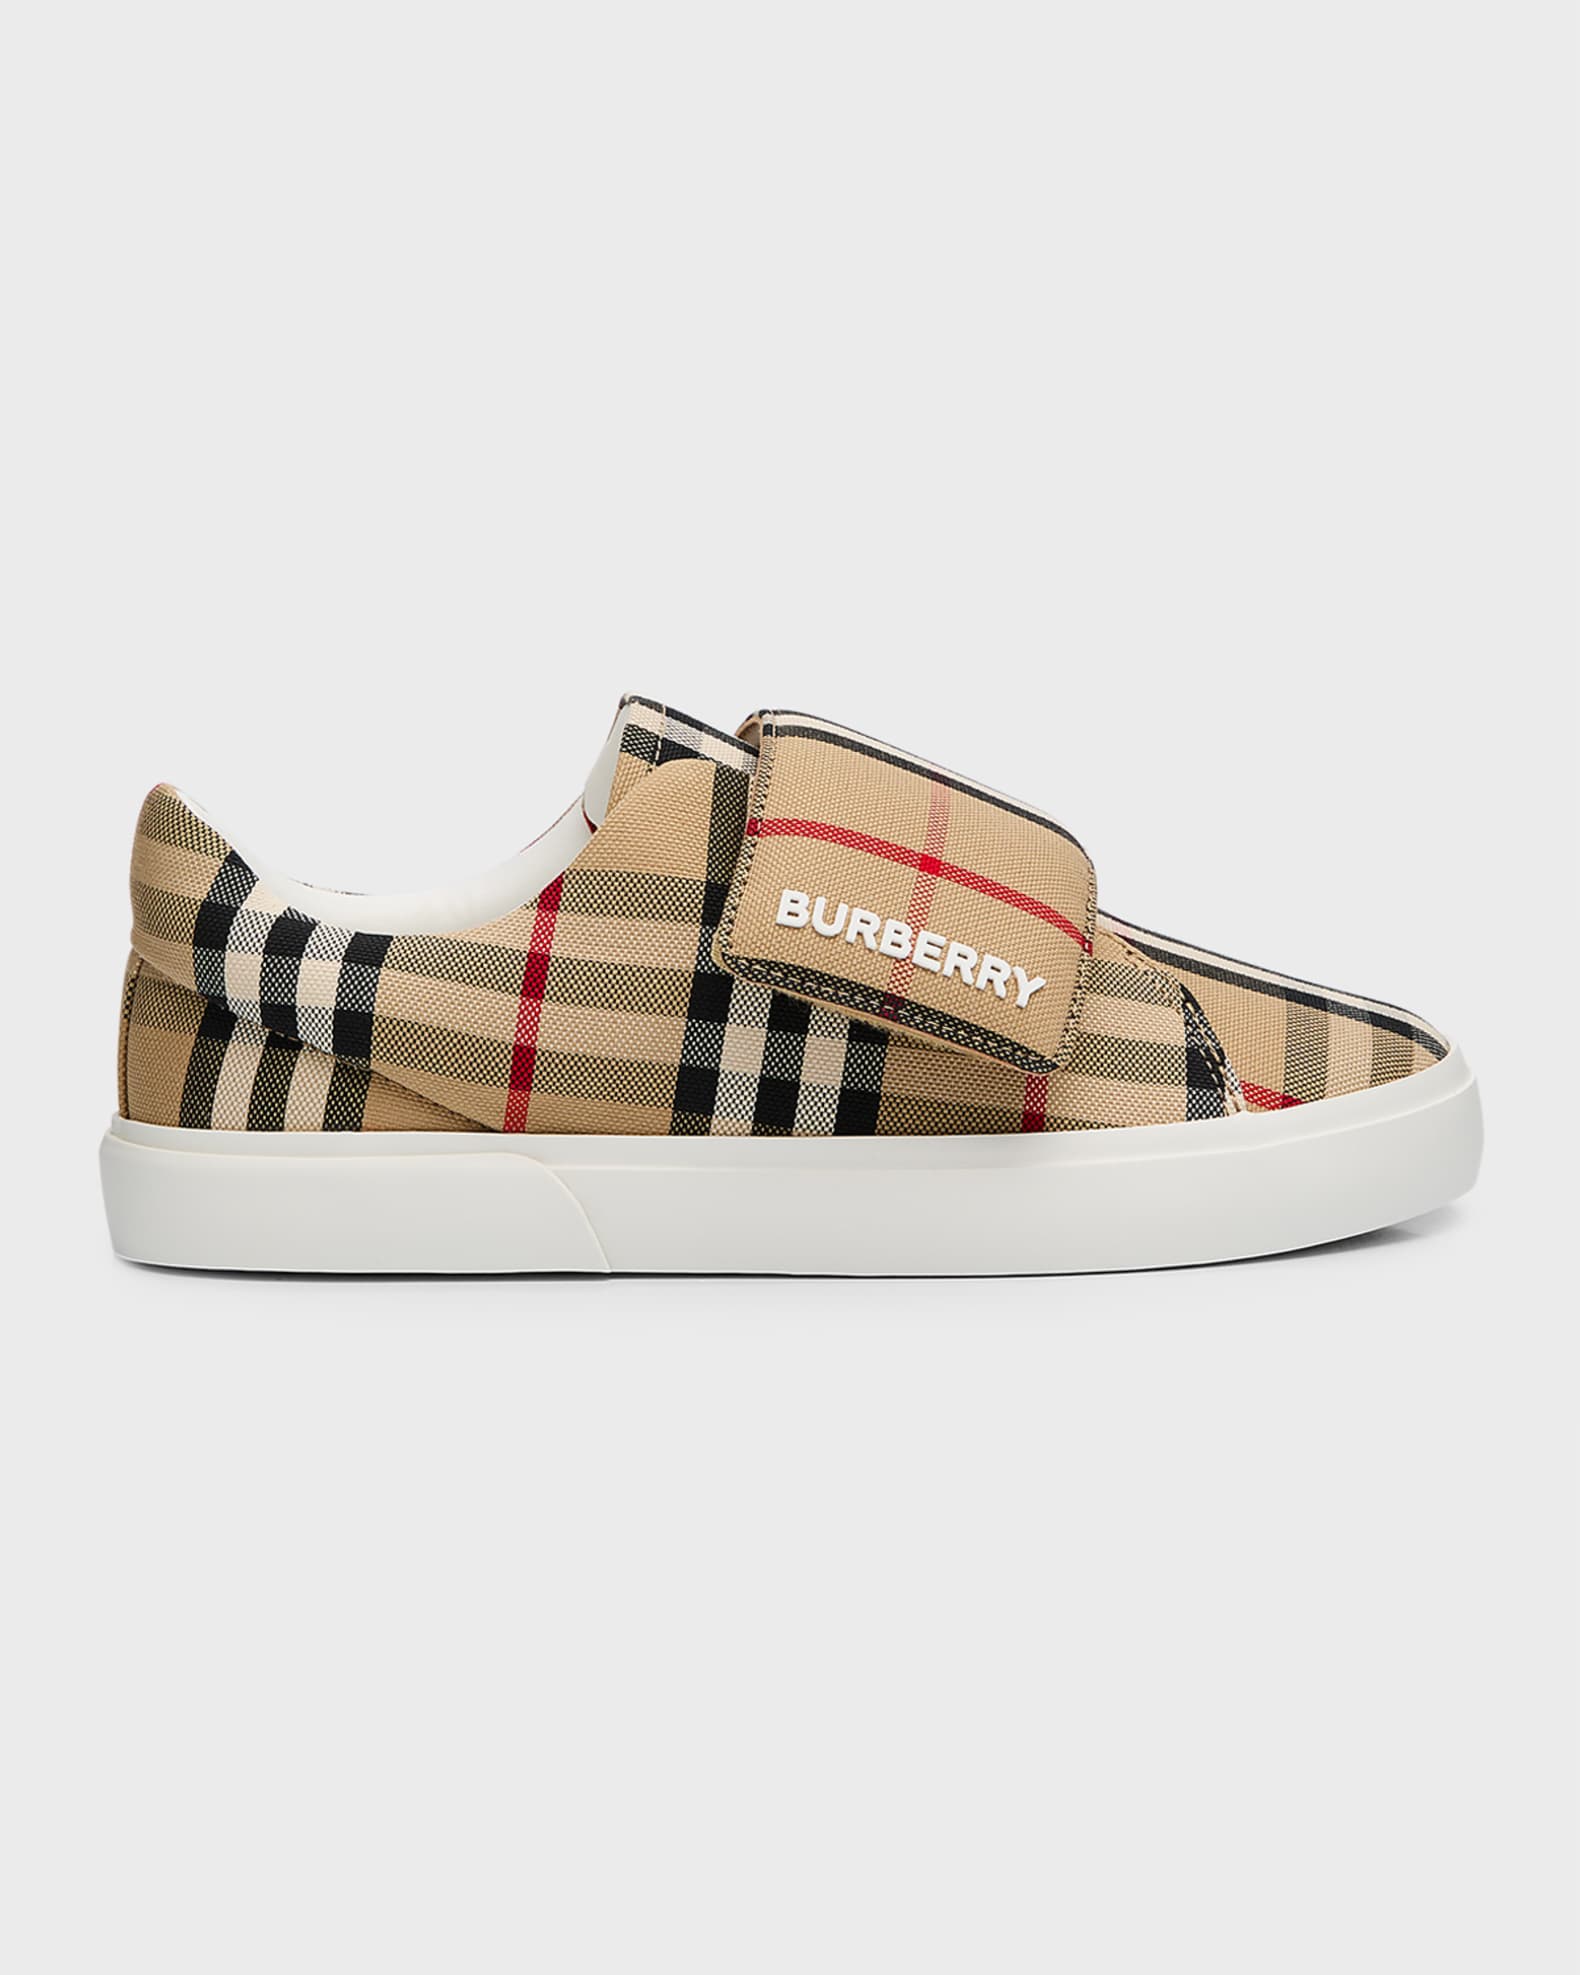 Burberry Kid's James Check-Print Sneakers, Toddlers/Kids | Neiman Marcus